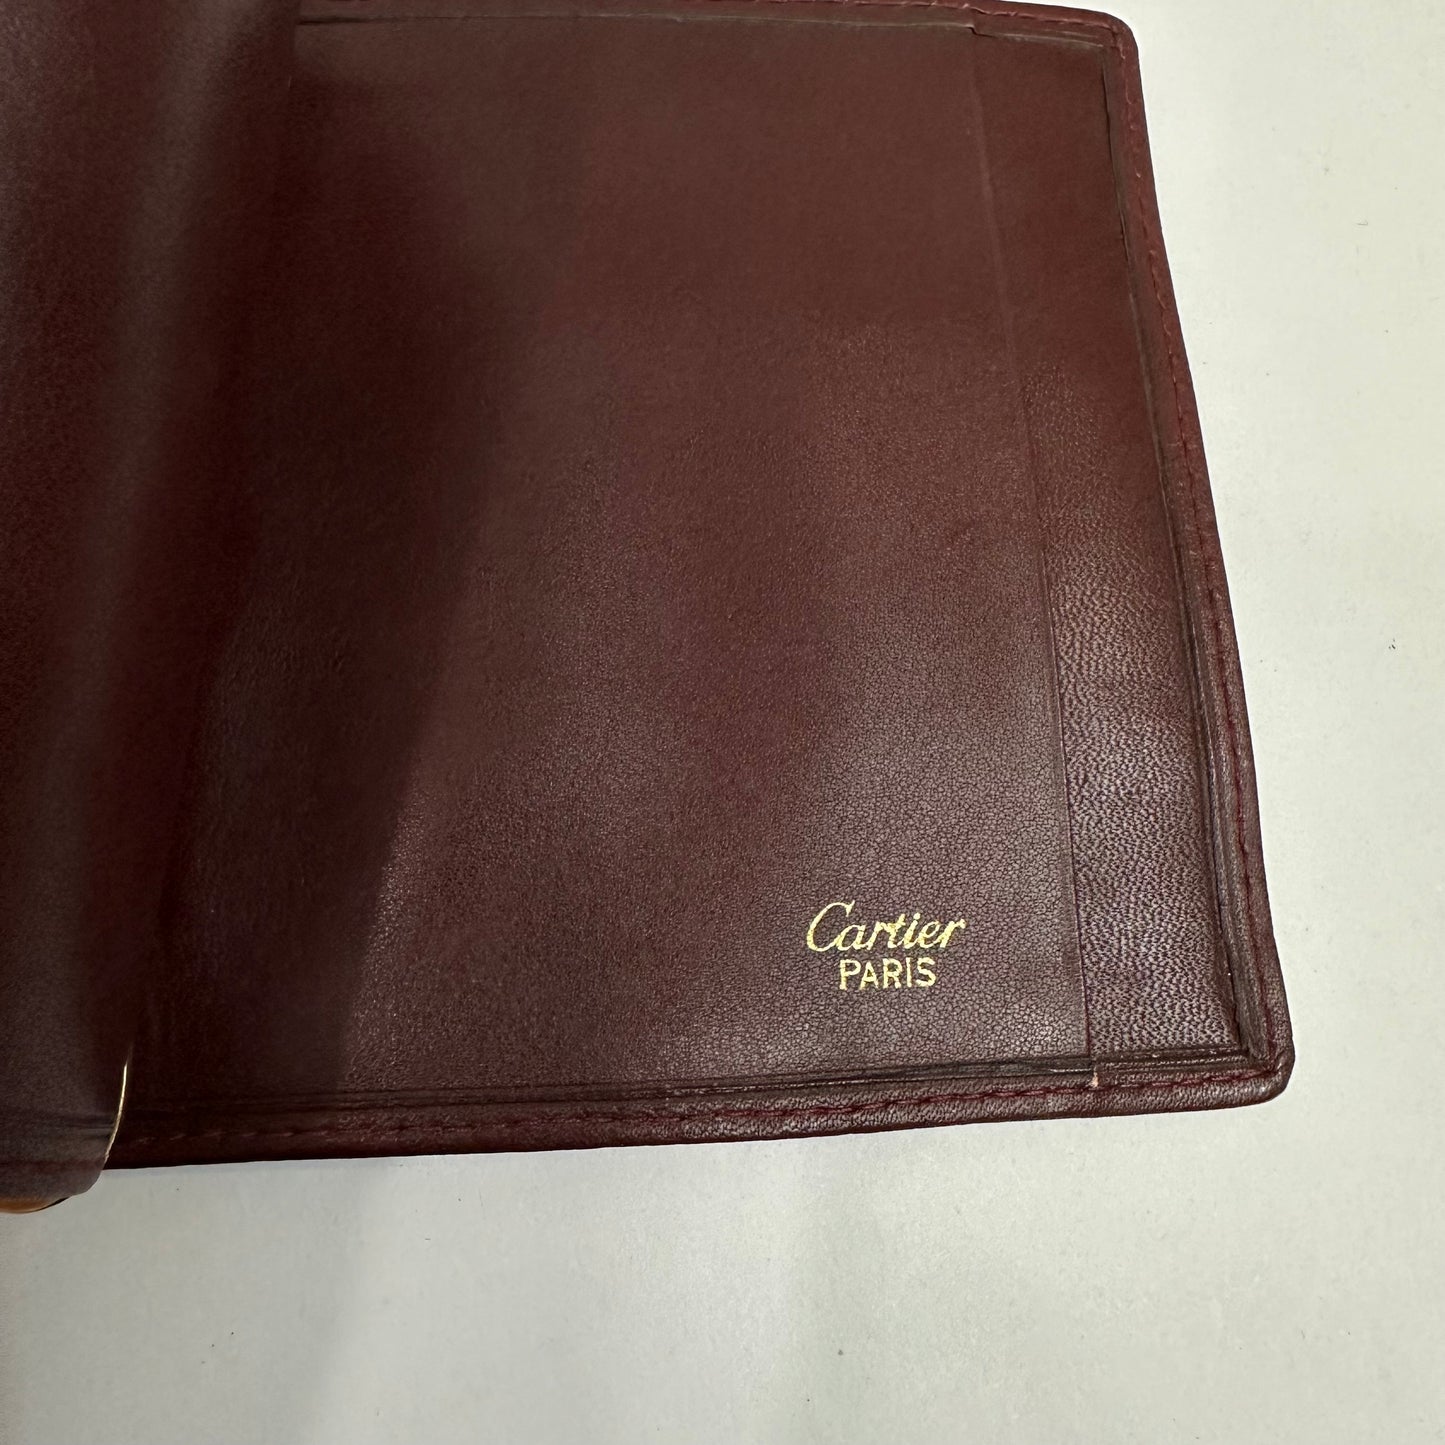 Vintage Cartier Bordeaux Leather Billfold Wallet with Money Clip